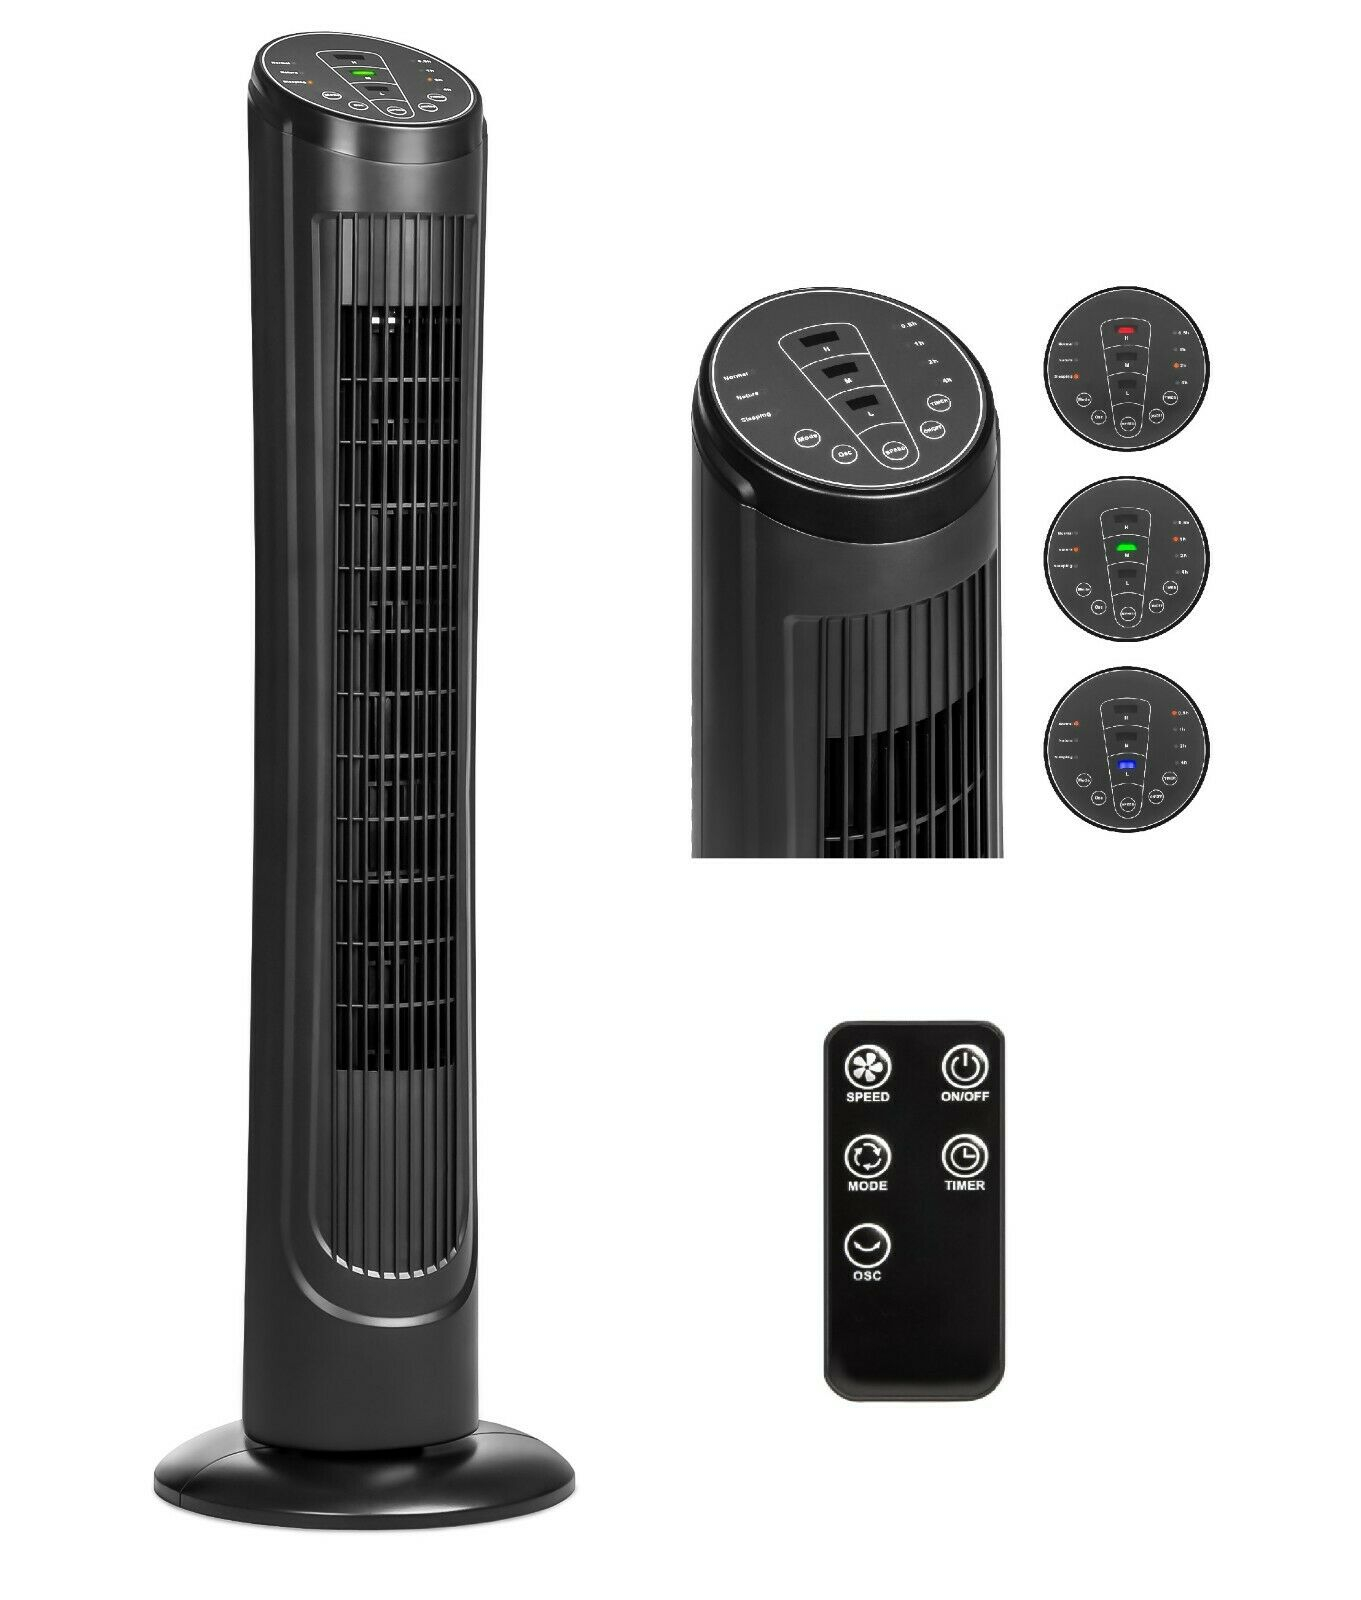 Best Choice Products Sky4715 40 Portable Oscillating Floor Tower Fan Black with regard to size 1361 X 1600